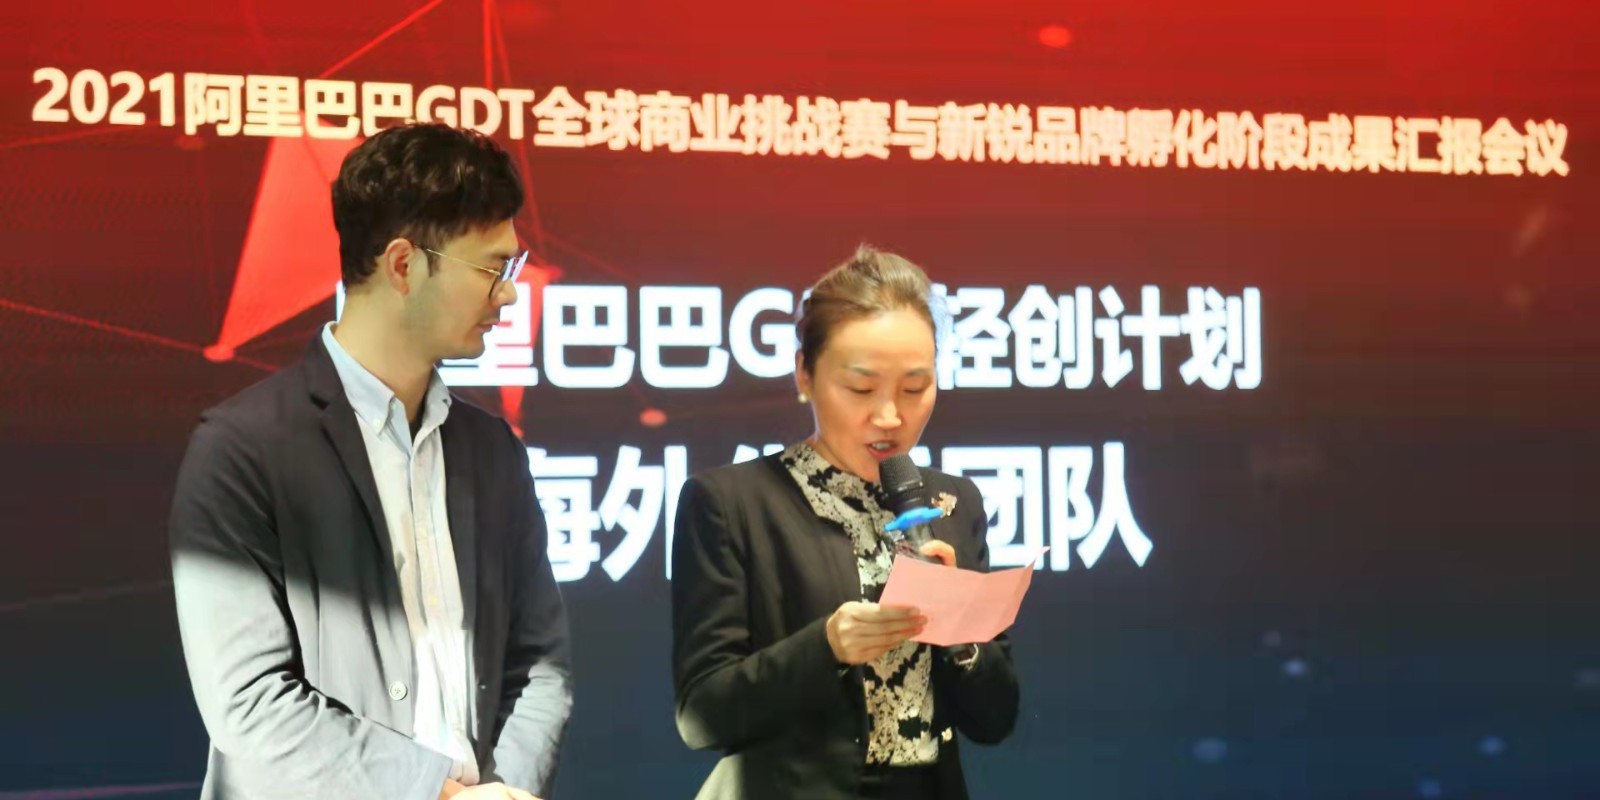 A report meeting on Alibaba GDT Global Business Challenge and the incubation stage of emerging brands was held